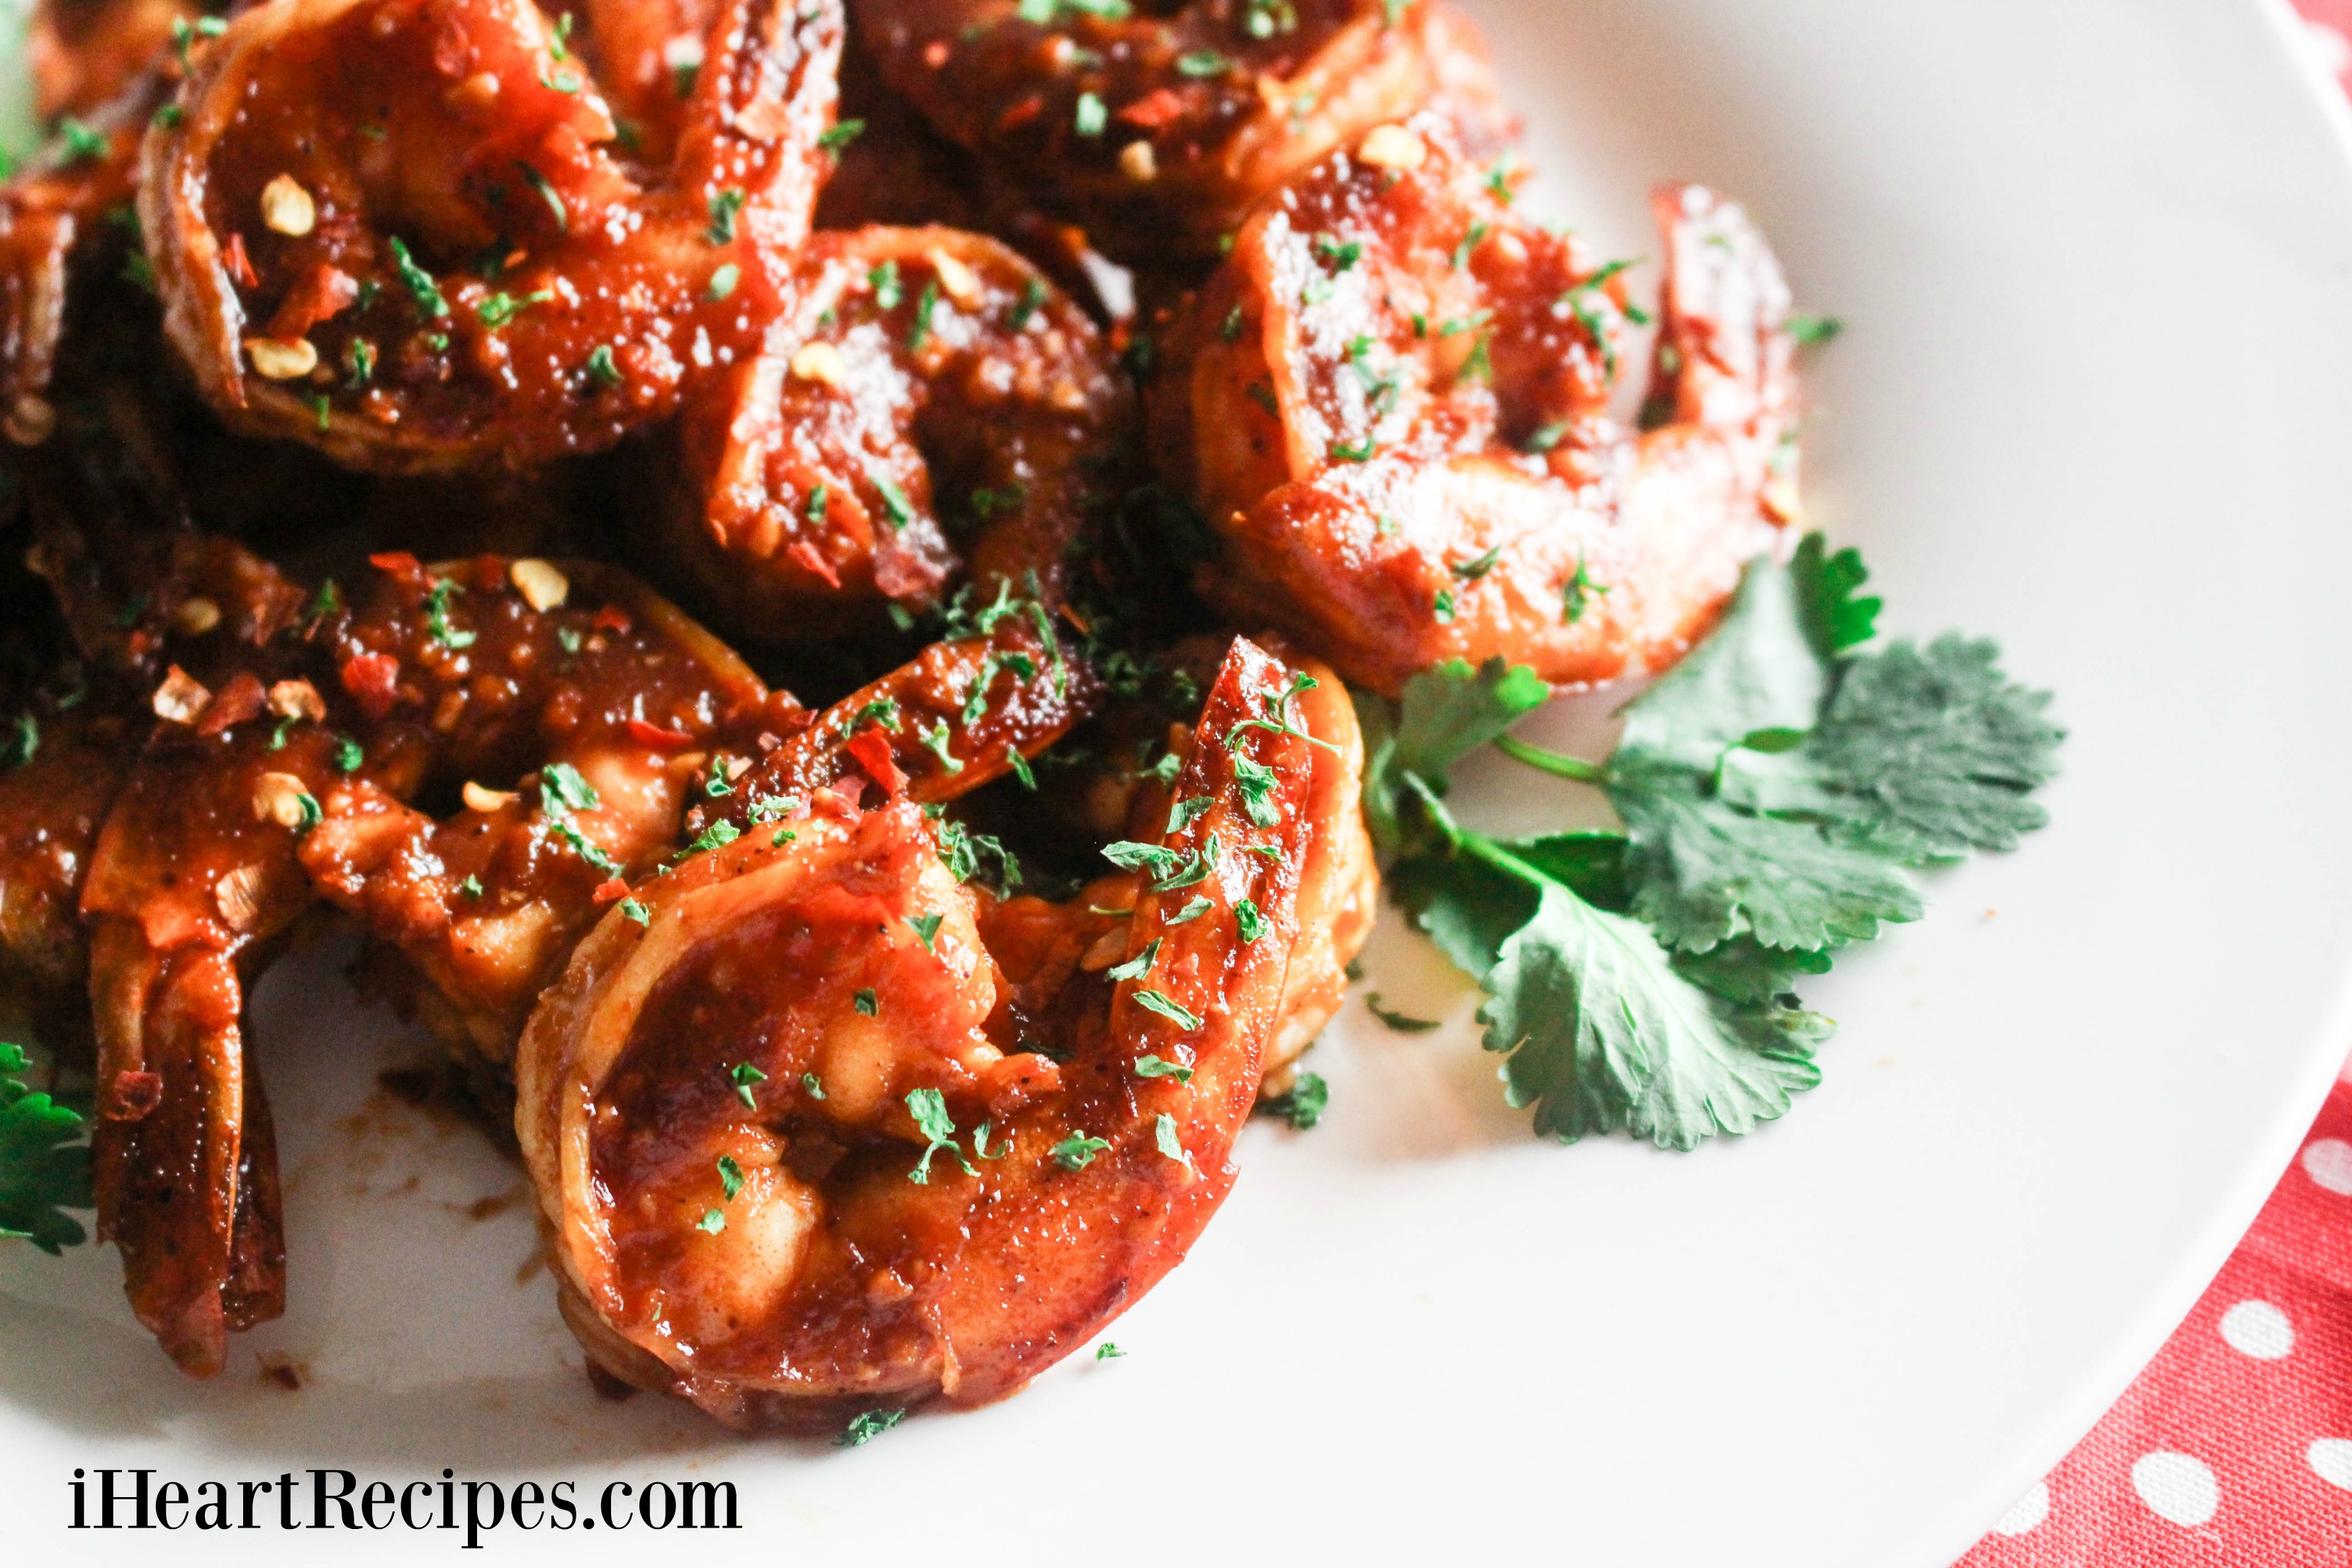 This oven baked shrimp is coated in a spicy bbq sauce